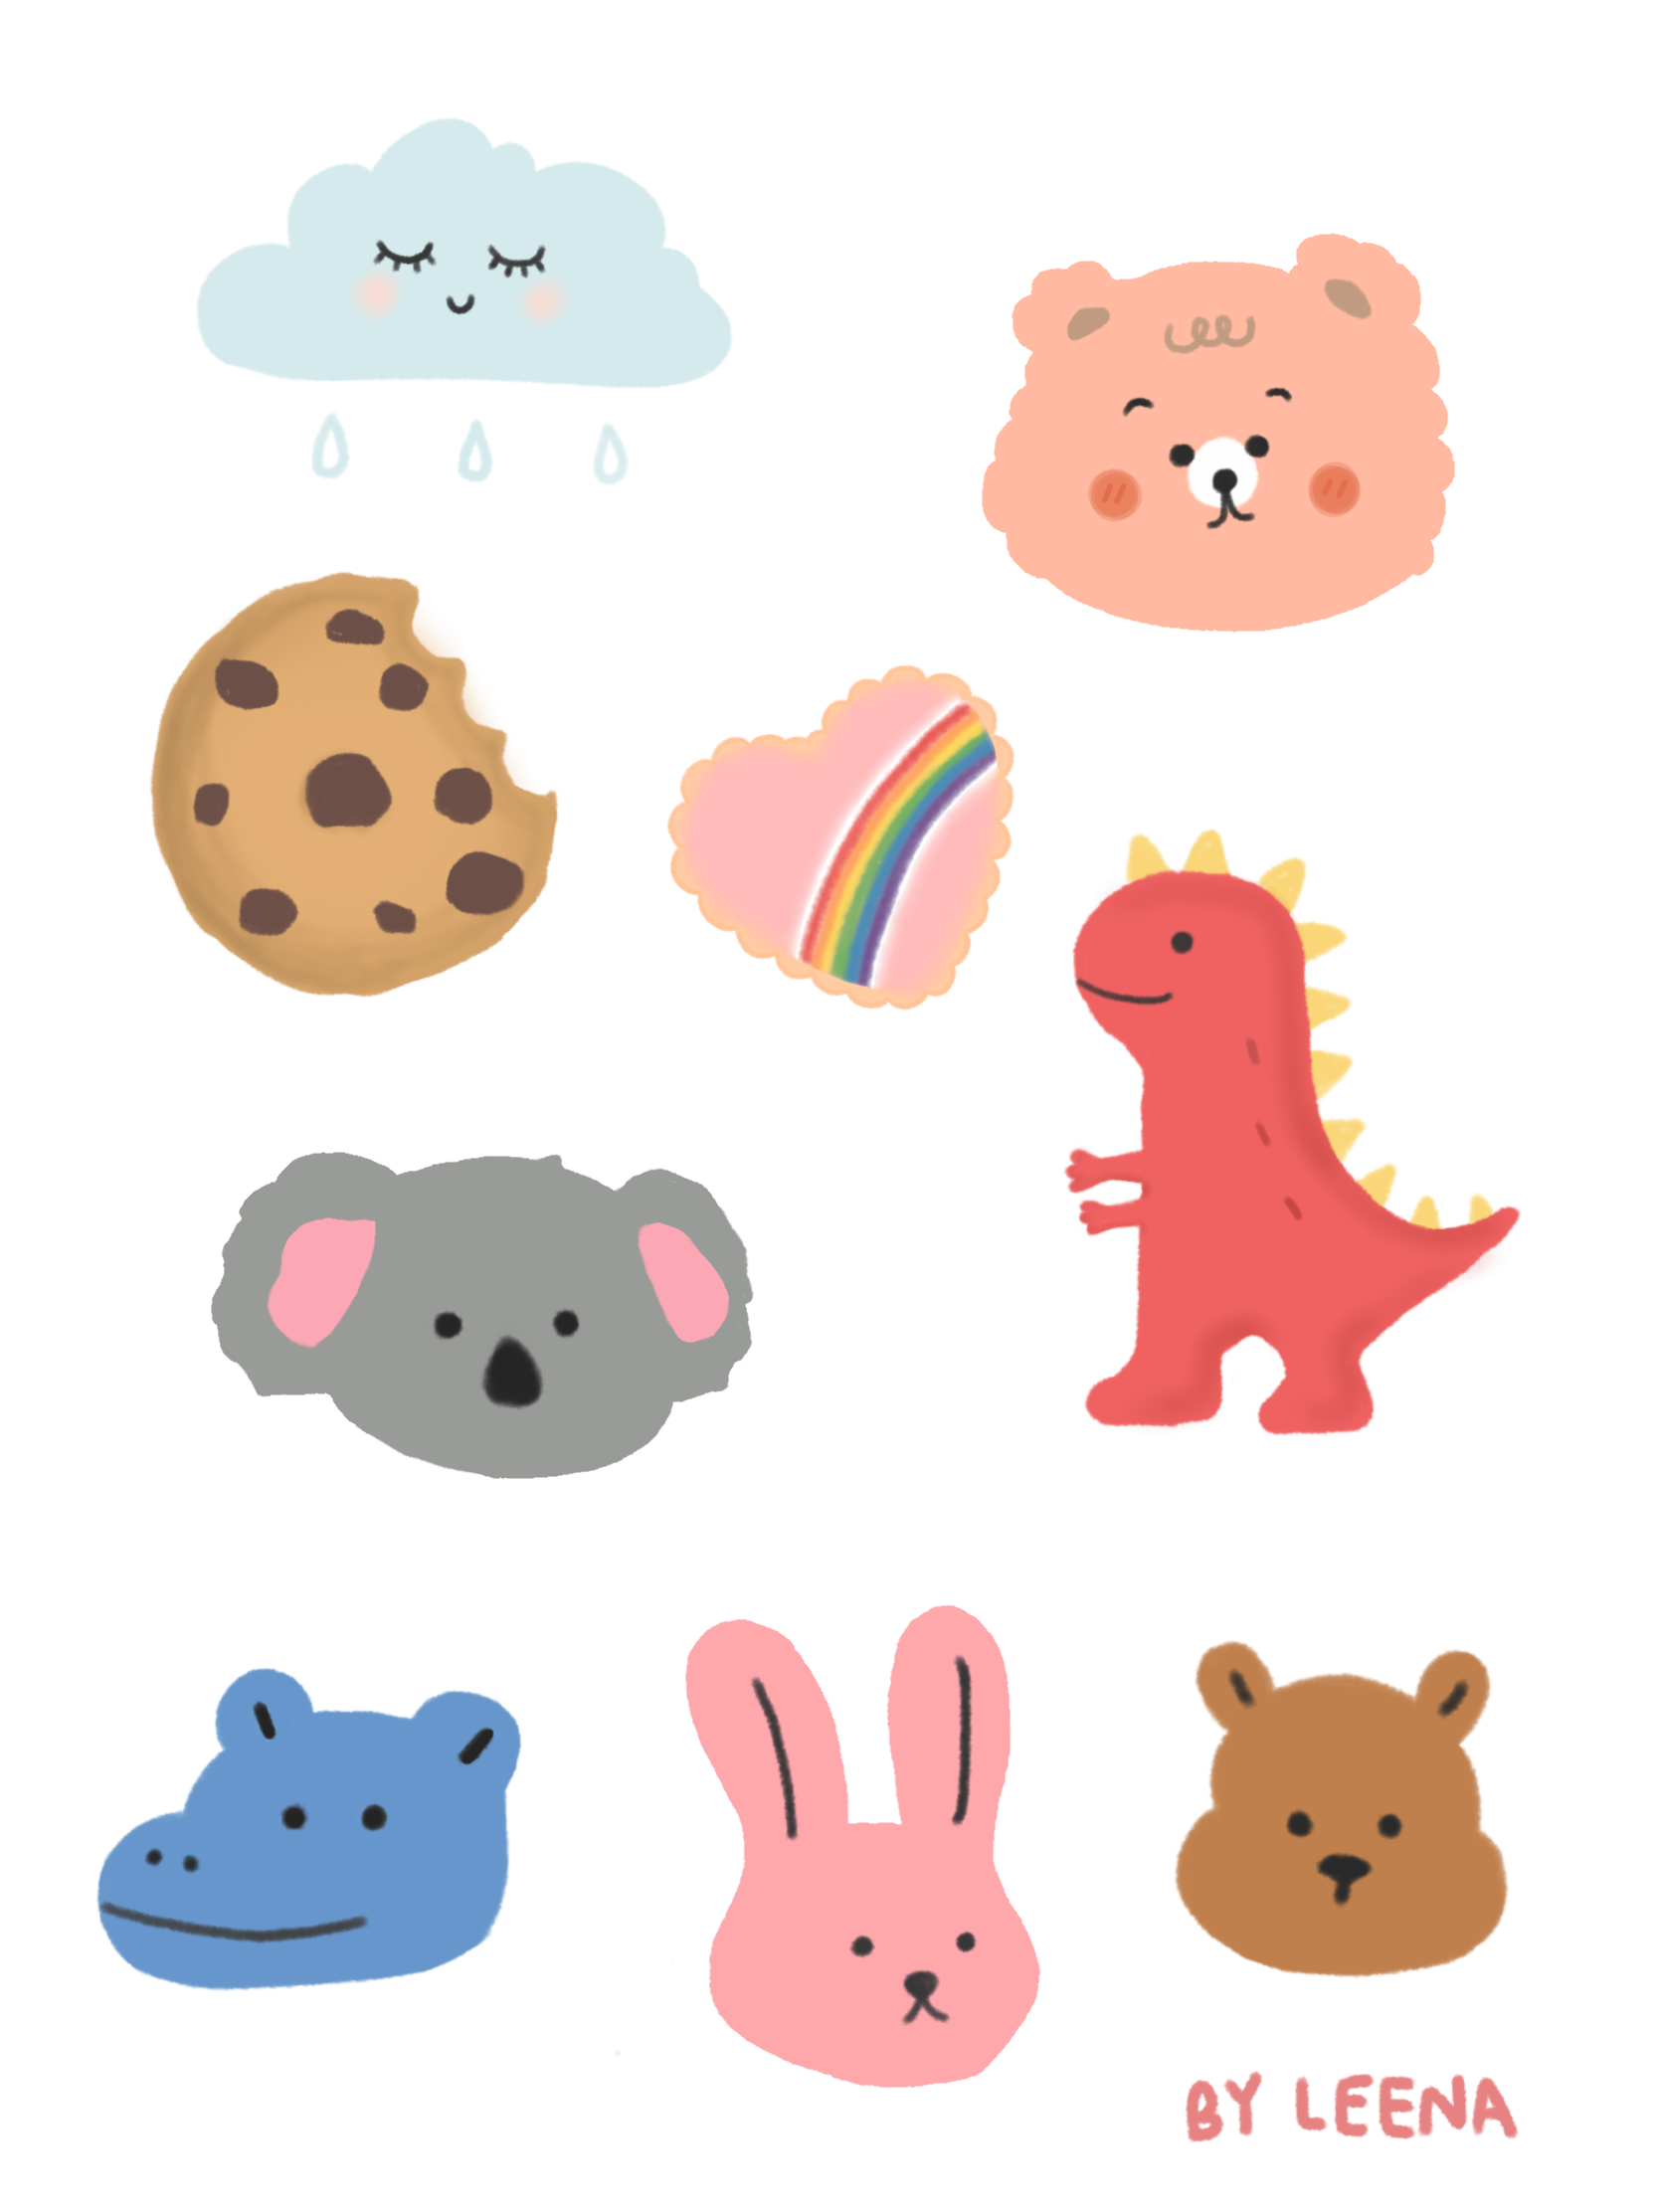 Cute sticker png free cute sticker png free downloadable with no watermark